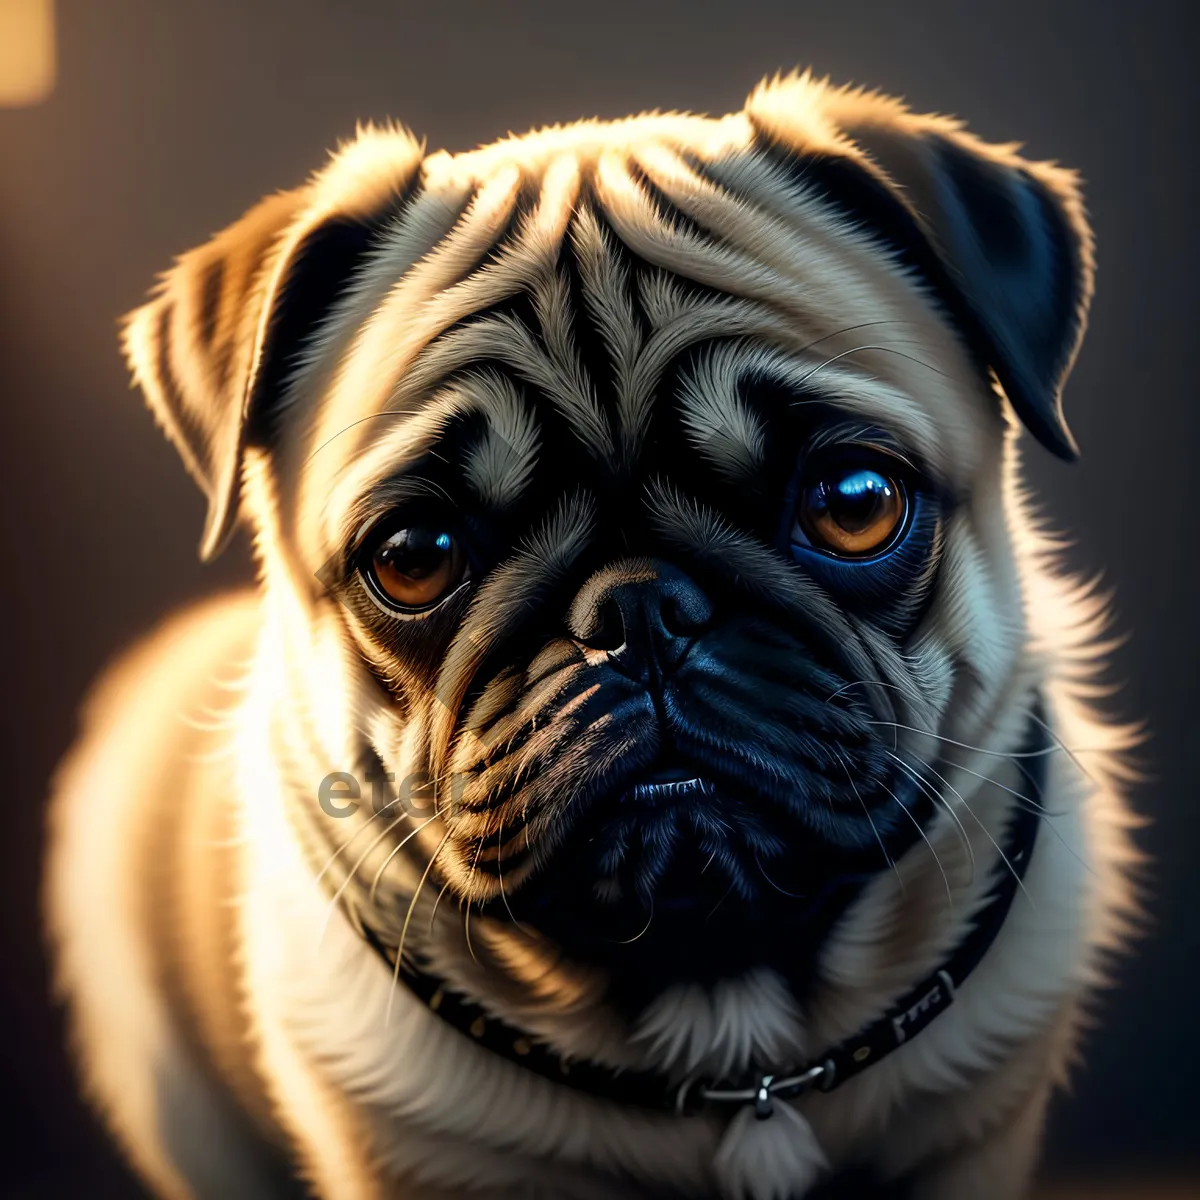 Picture of Adorable Pug Puppy with Wrinkles – Perfect Studio Portrait